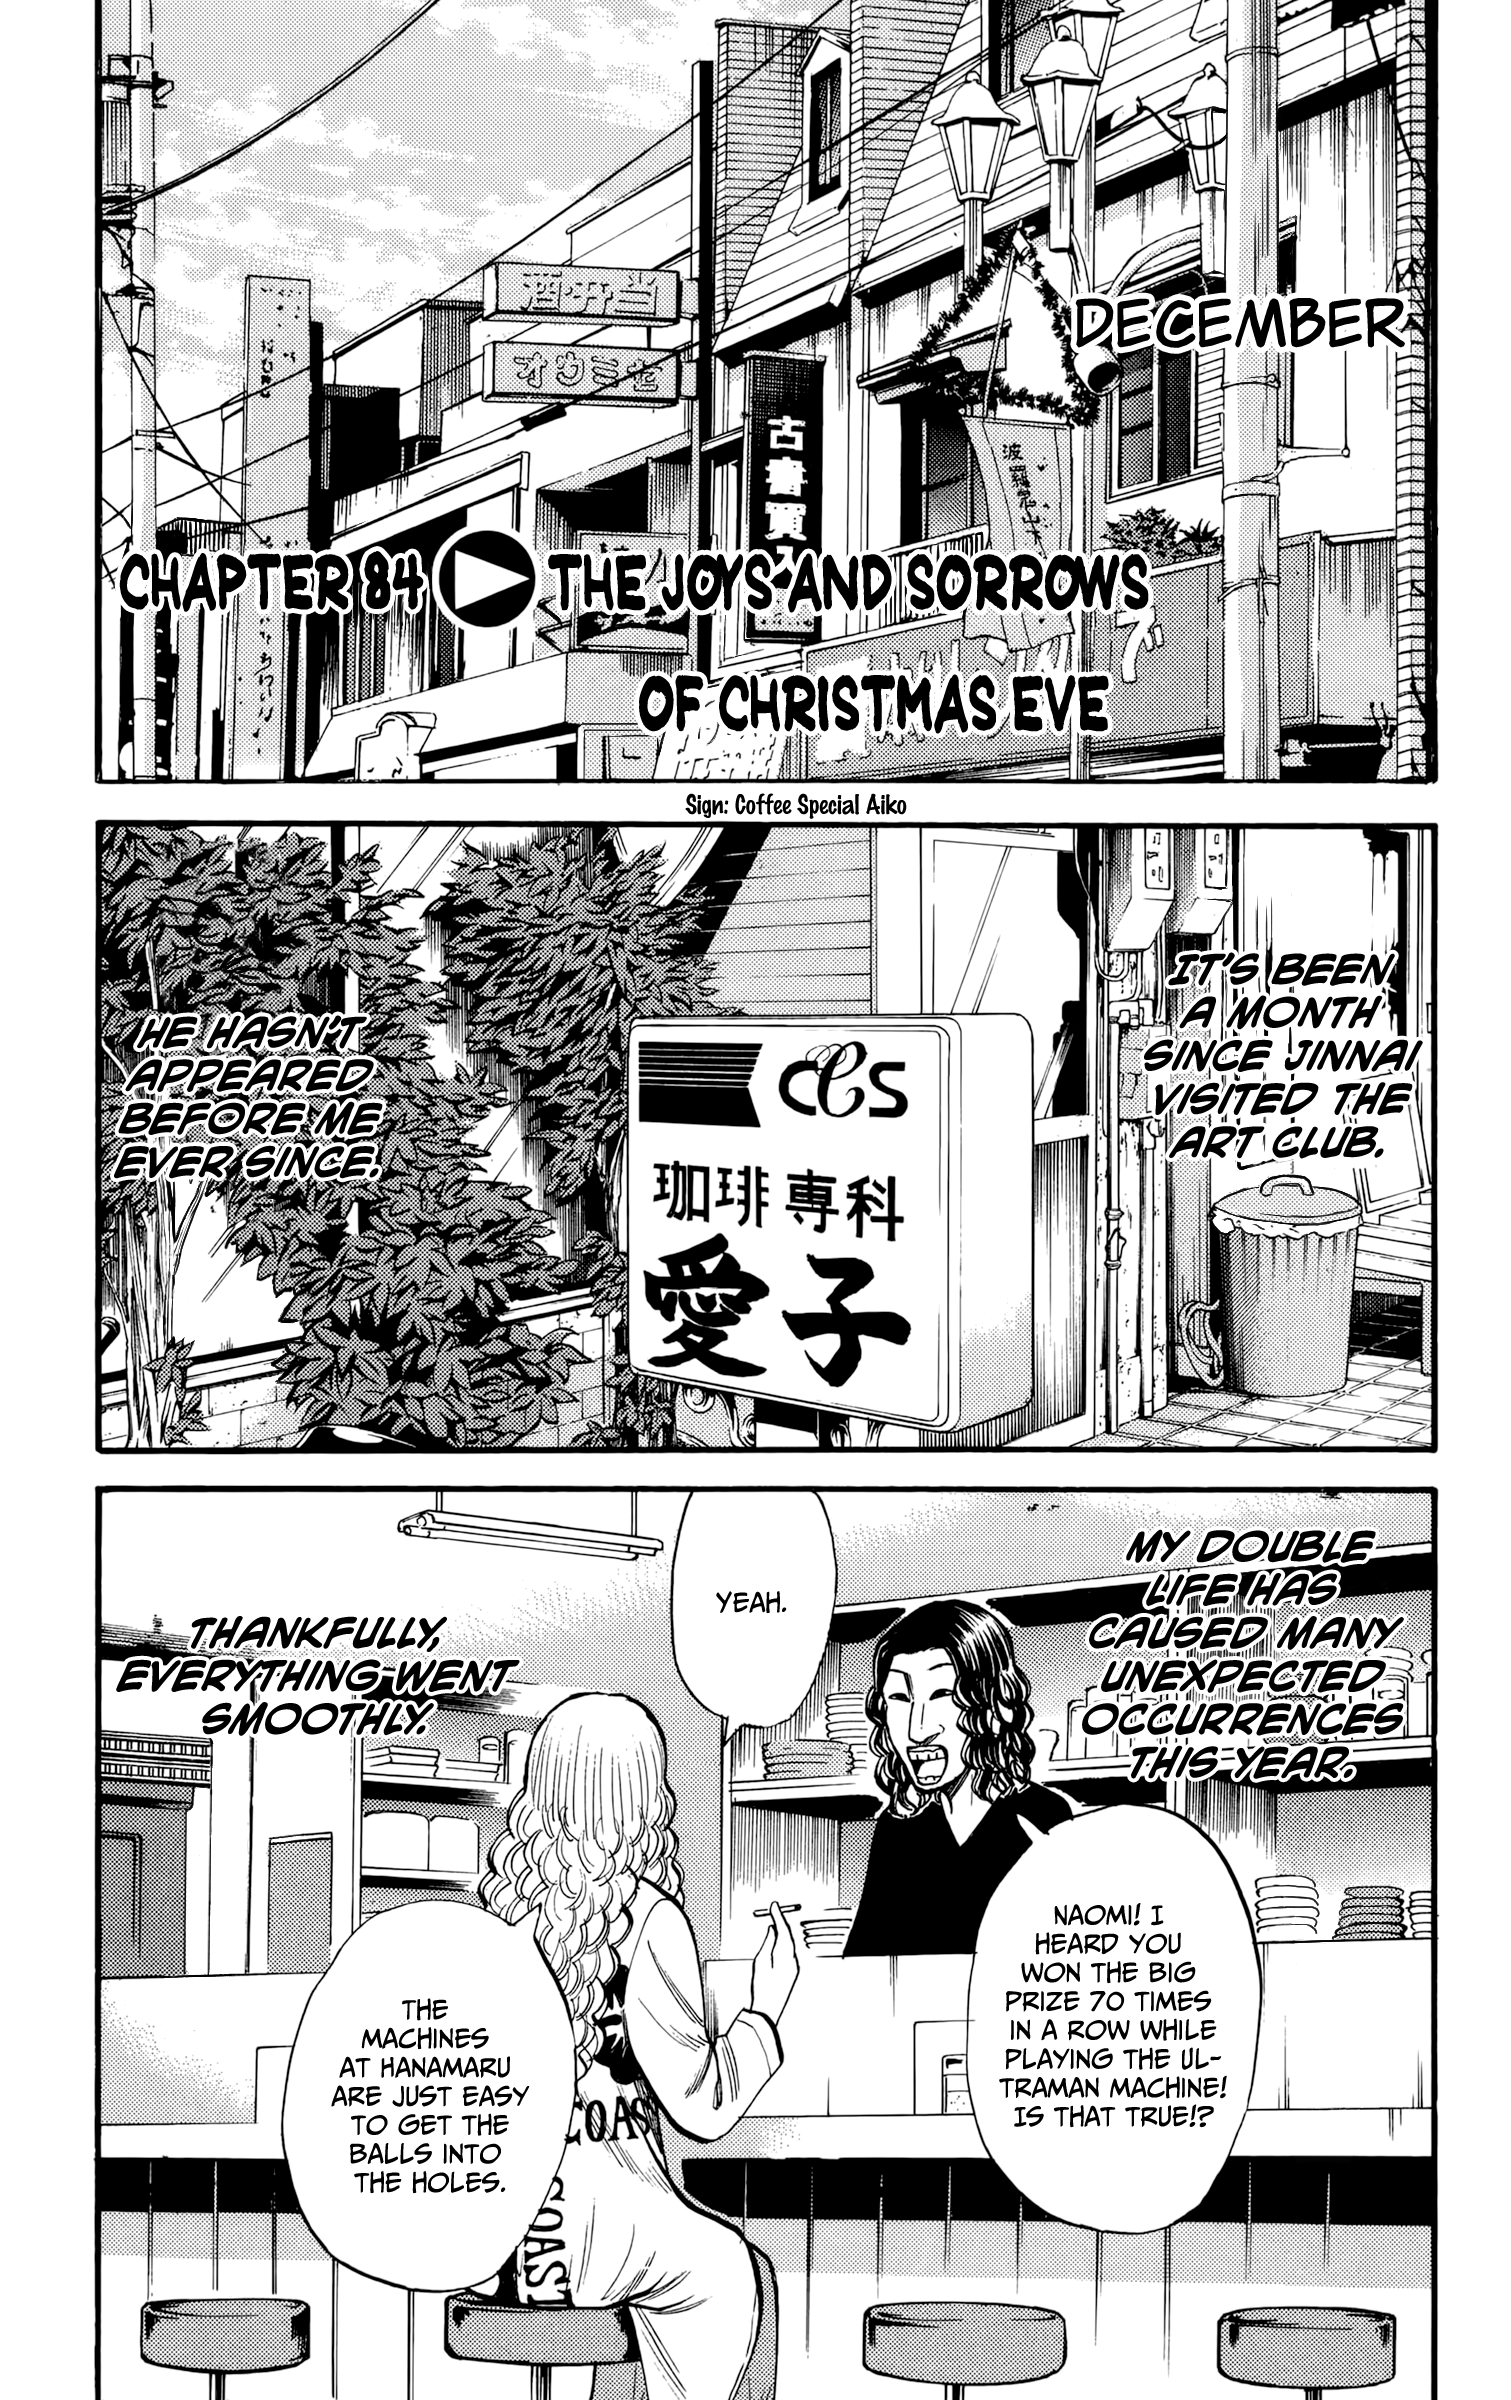 Nanba Mg5 Vol.10 Chapter 84: The Joys And Sorrows Of Christmas Eve - Picture 1